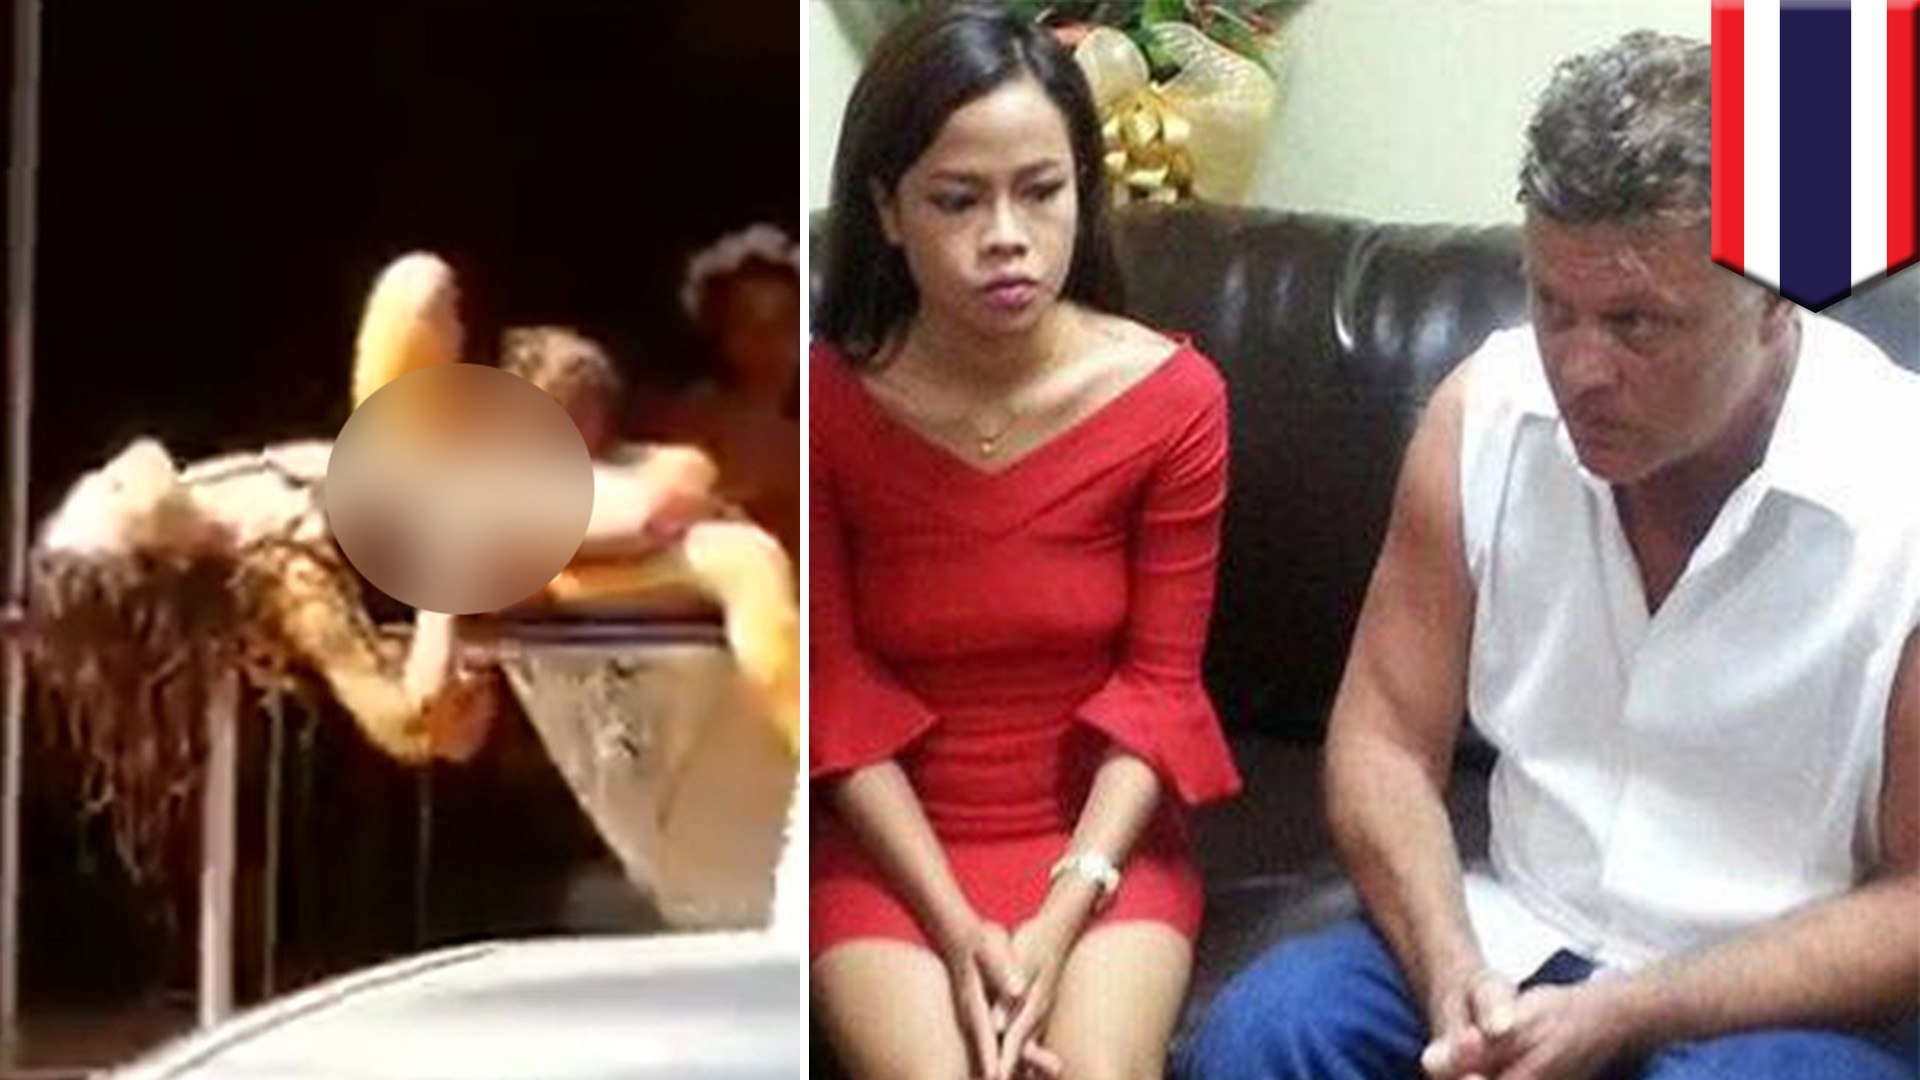 American charged with public indecency after performing oral sex on Thai bar girl